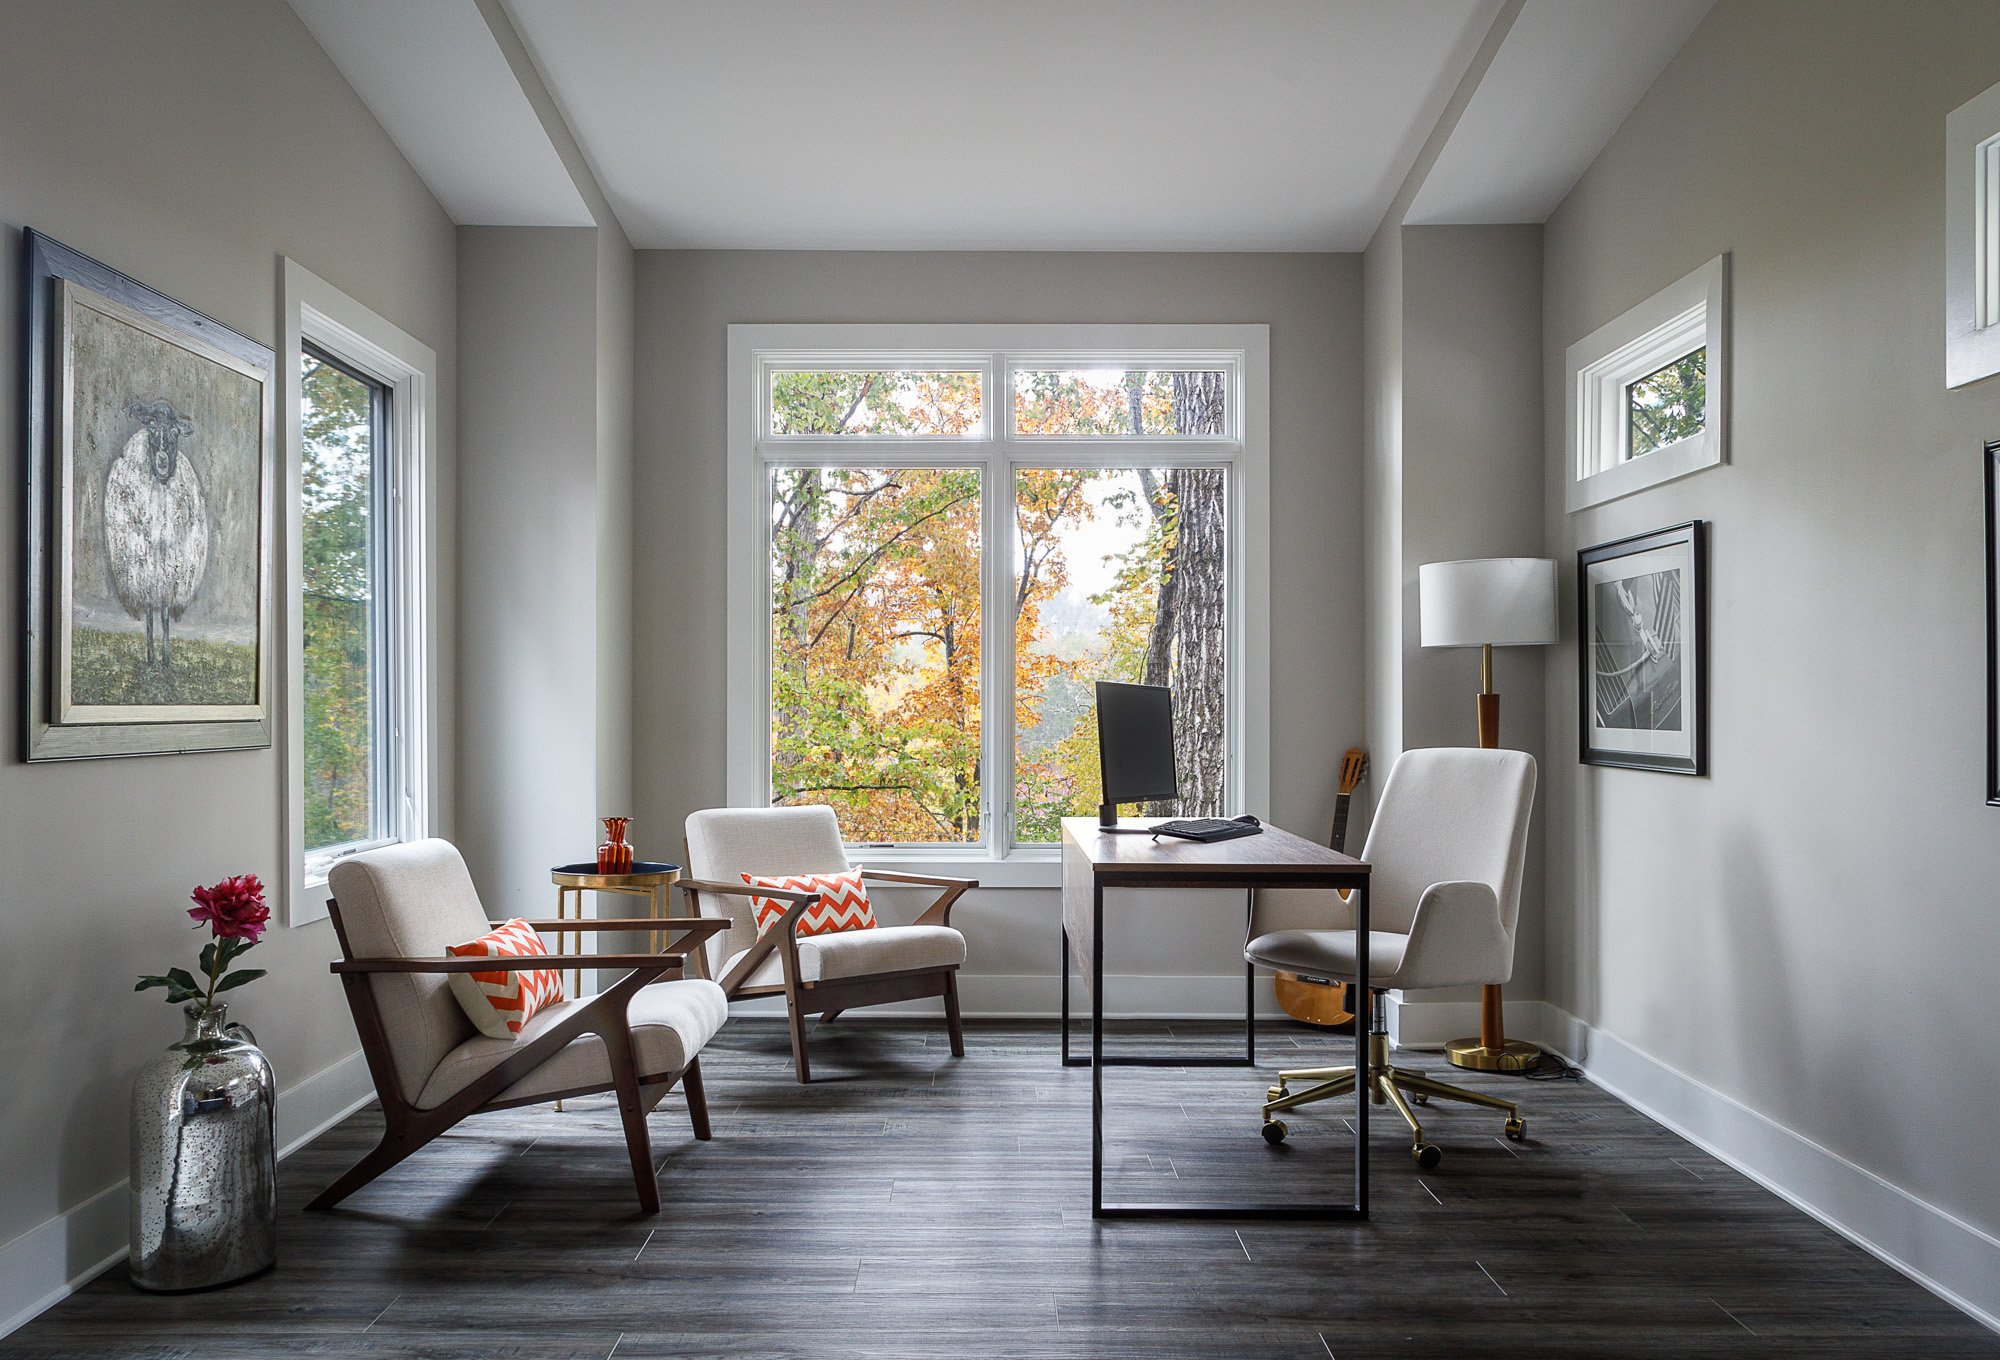 Elegant home office with large windows, modern furnishings, and autumnal forest view.